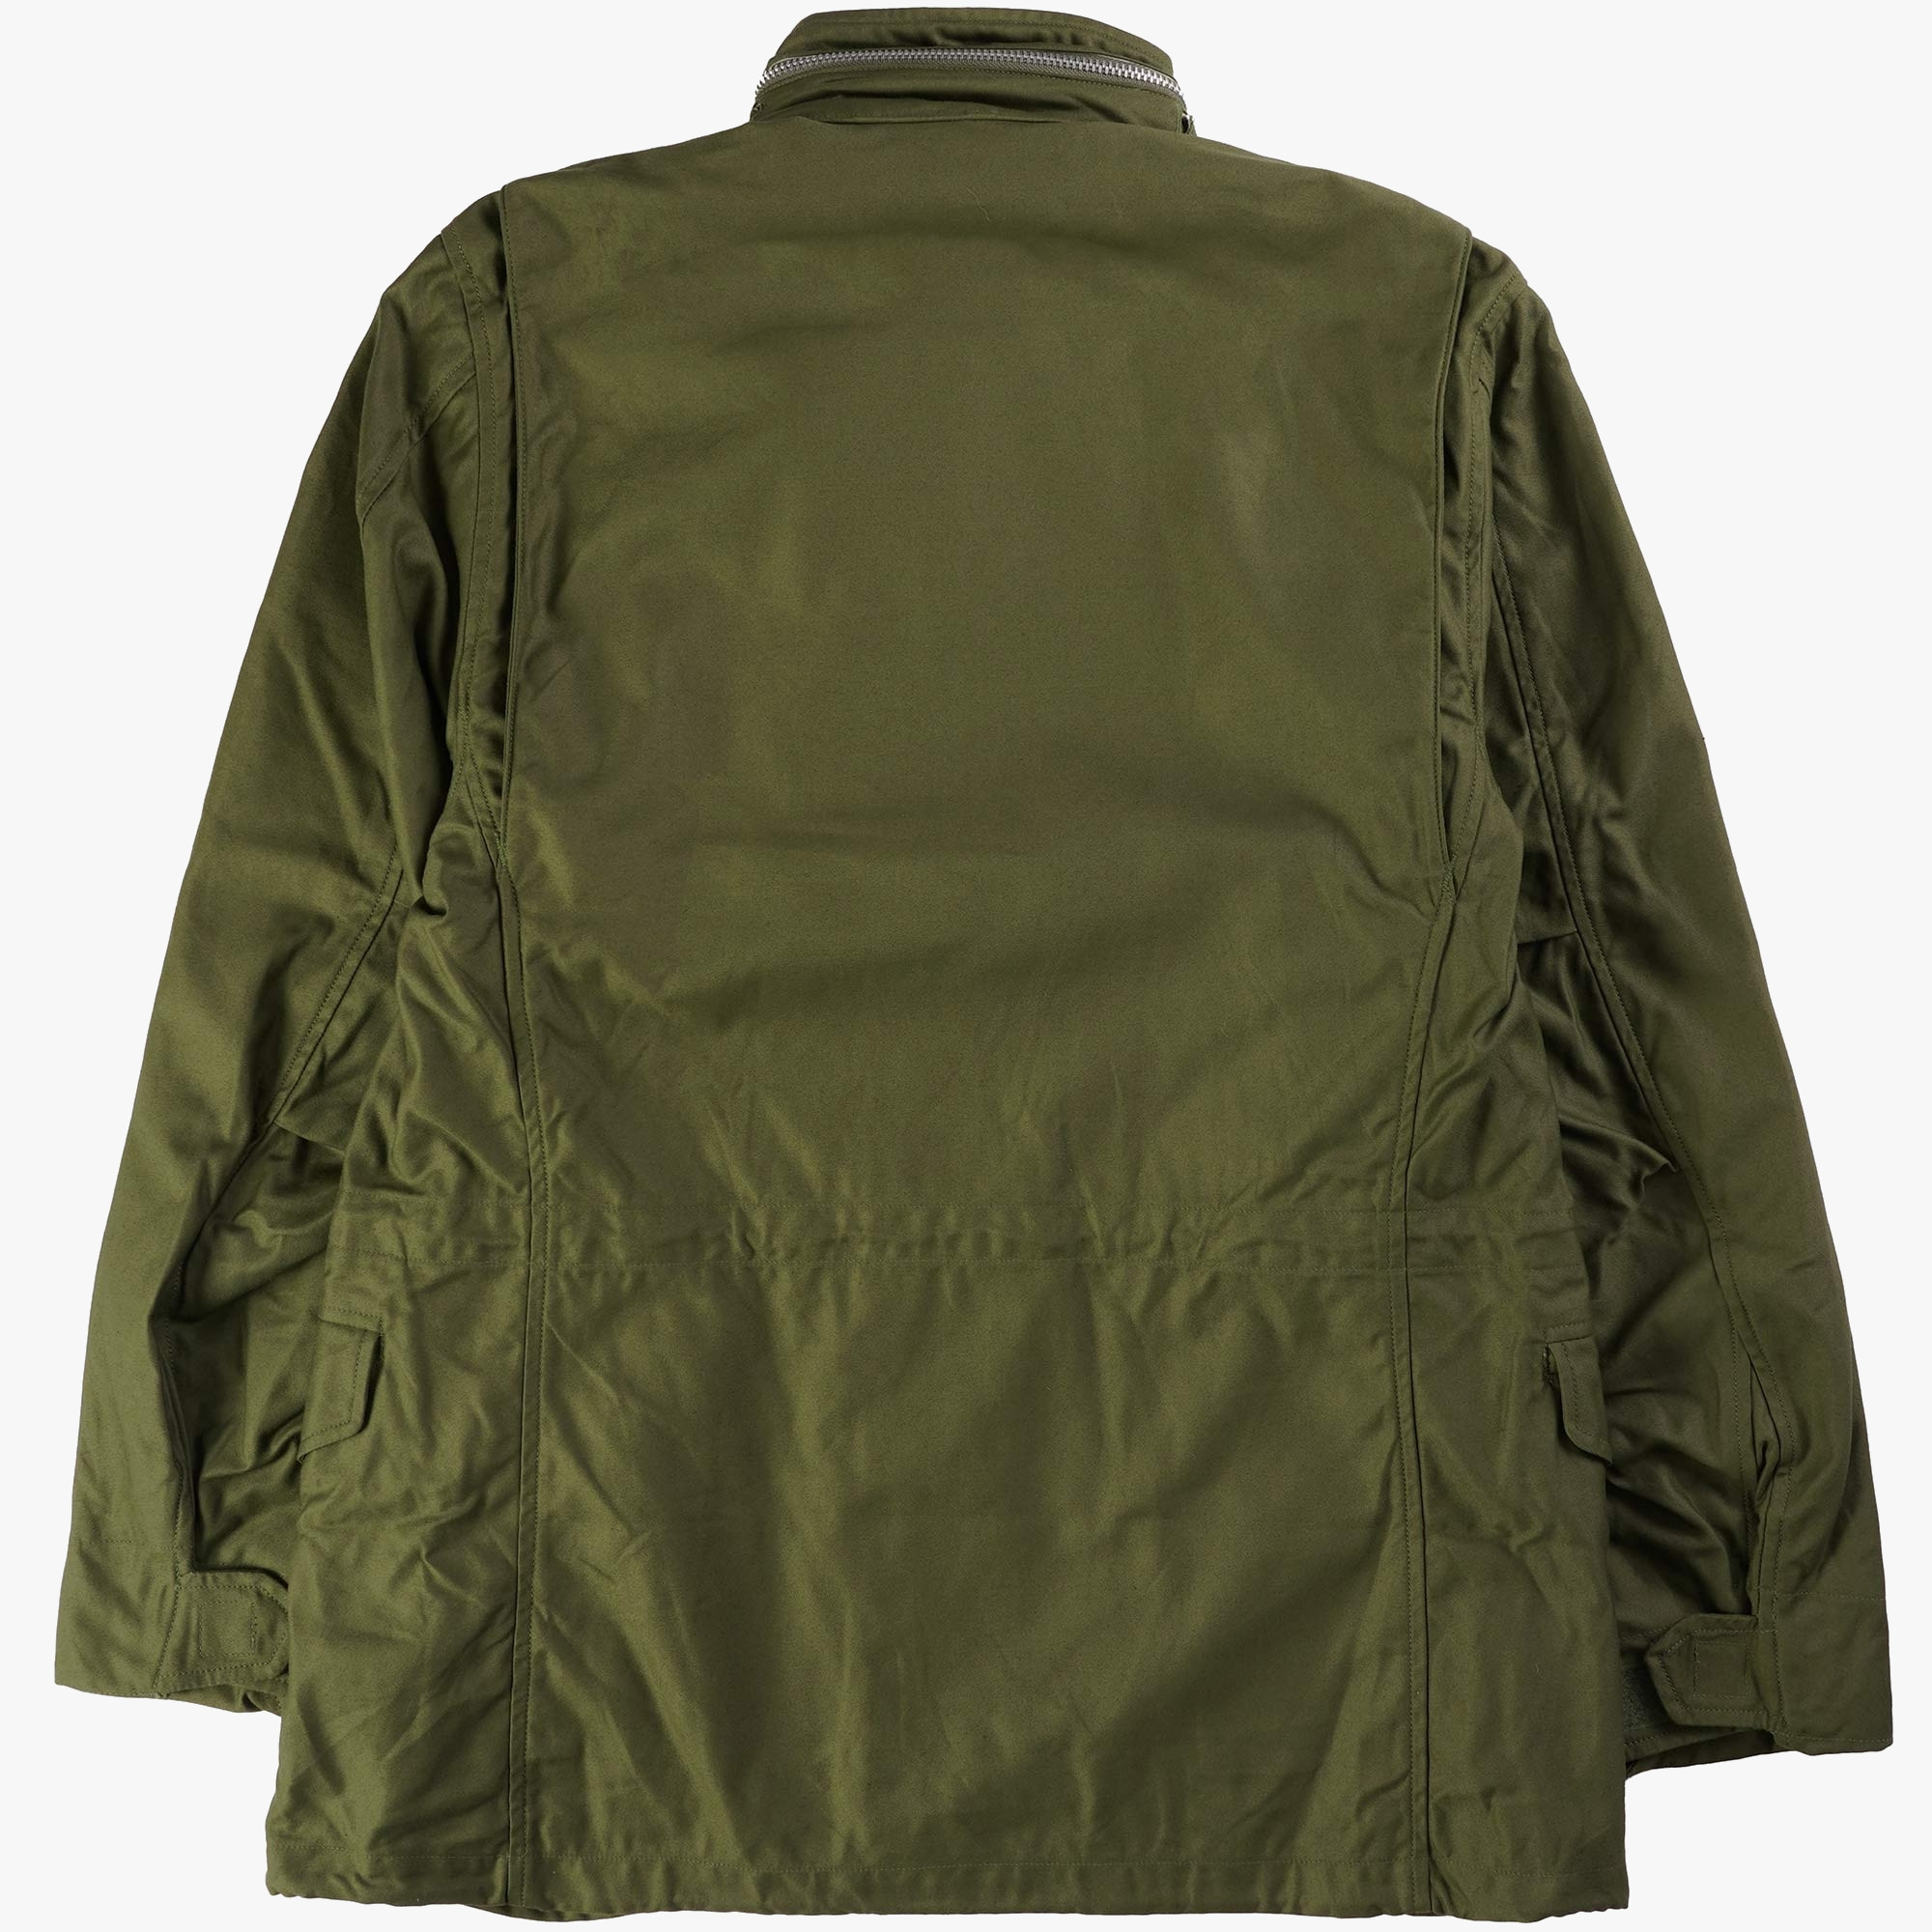 ORSLOW M-65 JACKET ARMY GREEN